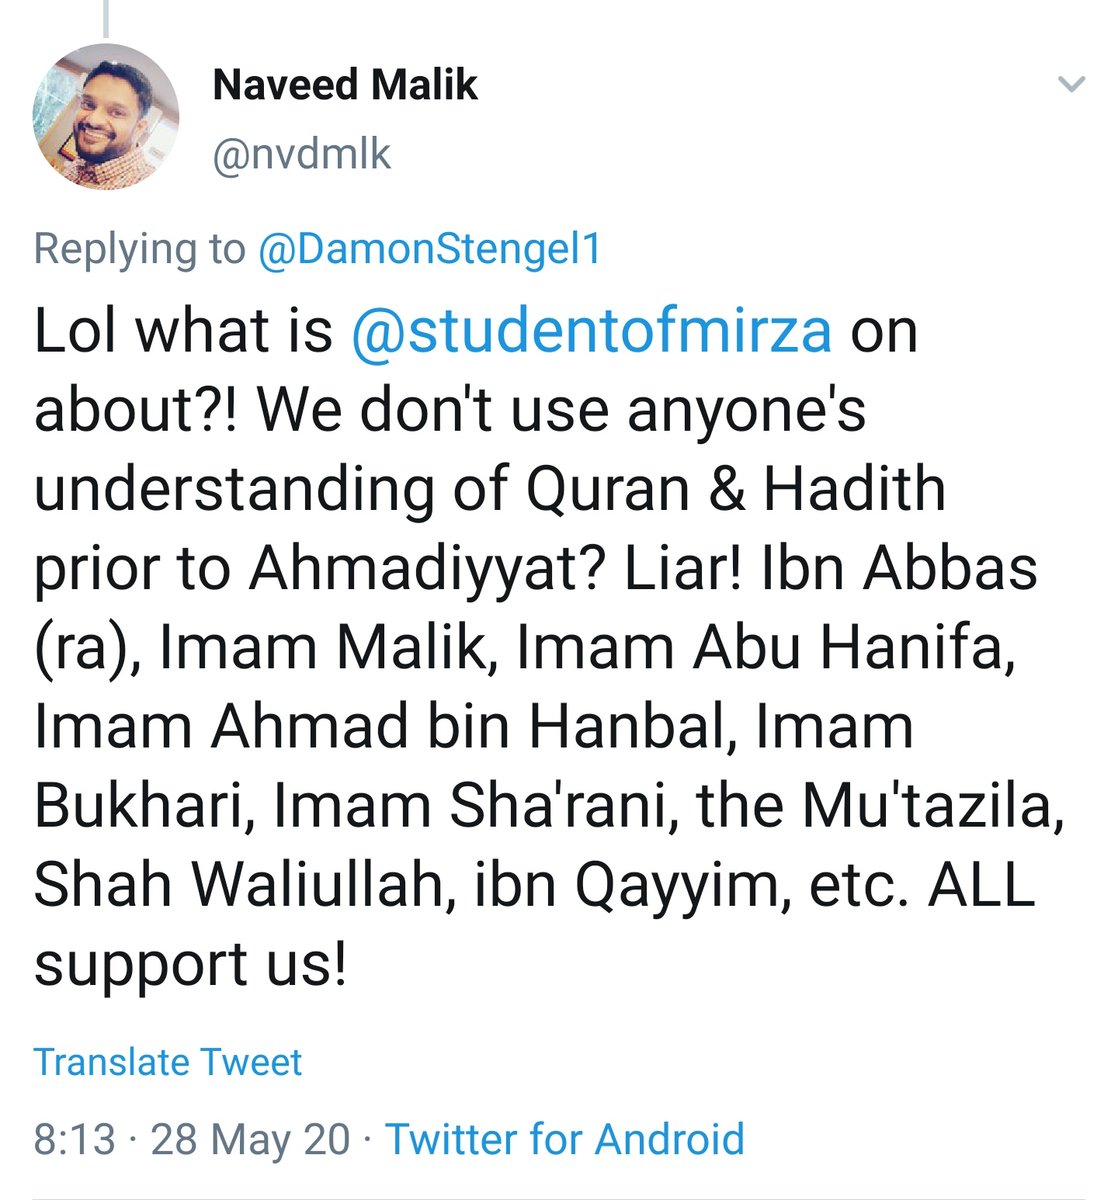 Thread for  @nvdmlk addressing the claims in the below tweets.Specifically the support for the Ahmadiyya position by a list of scholars and the claim the prophet Muhammad SAW repeatedly confirmed the death of Jesus Isa AS  #Ahmadiyya  #Dialogue